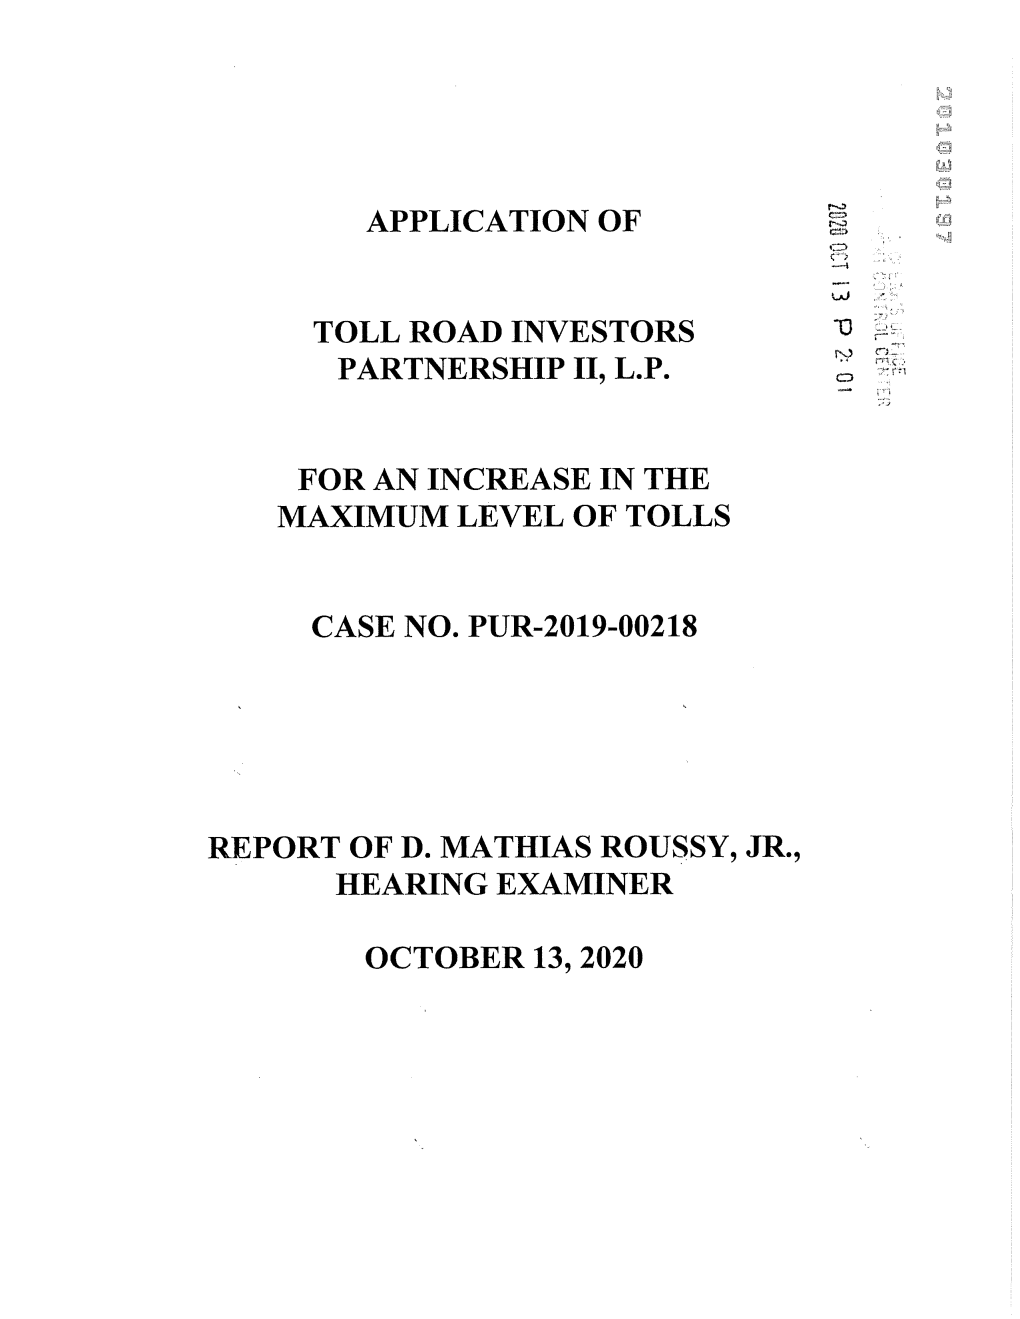 Application of Toll Road Investors Partnership II, L.P., for Approval of Refinancing and Amendment of Certificate of Authority, Case No